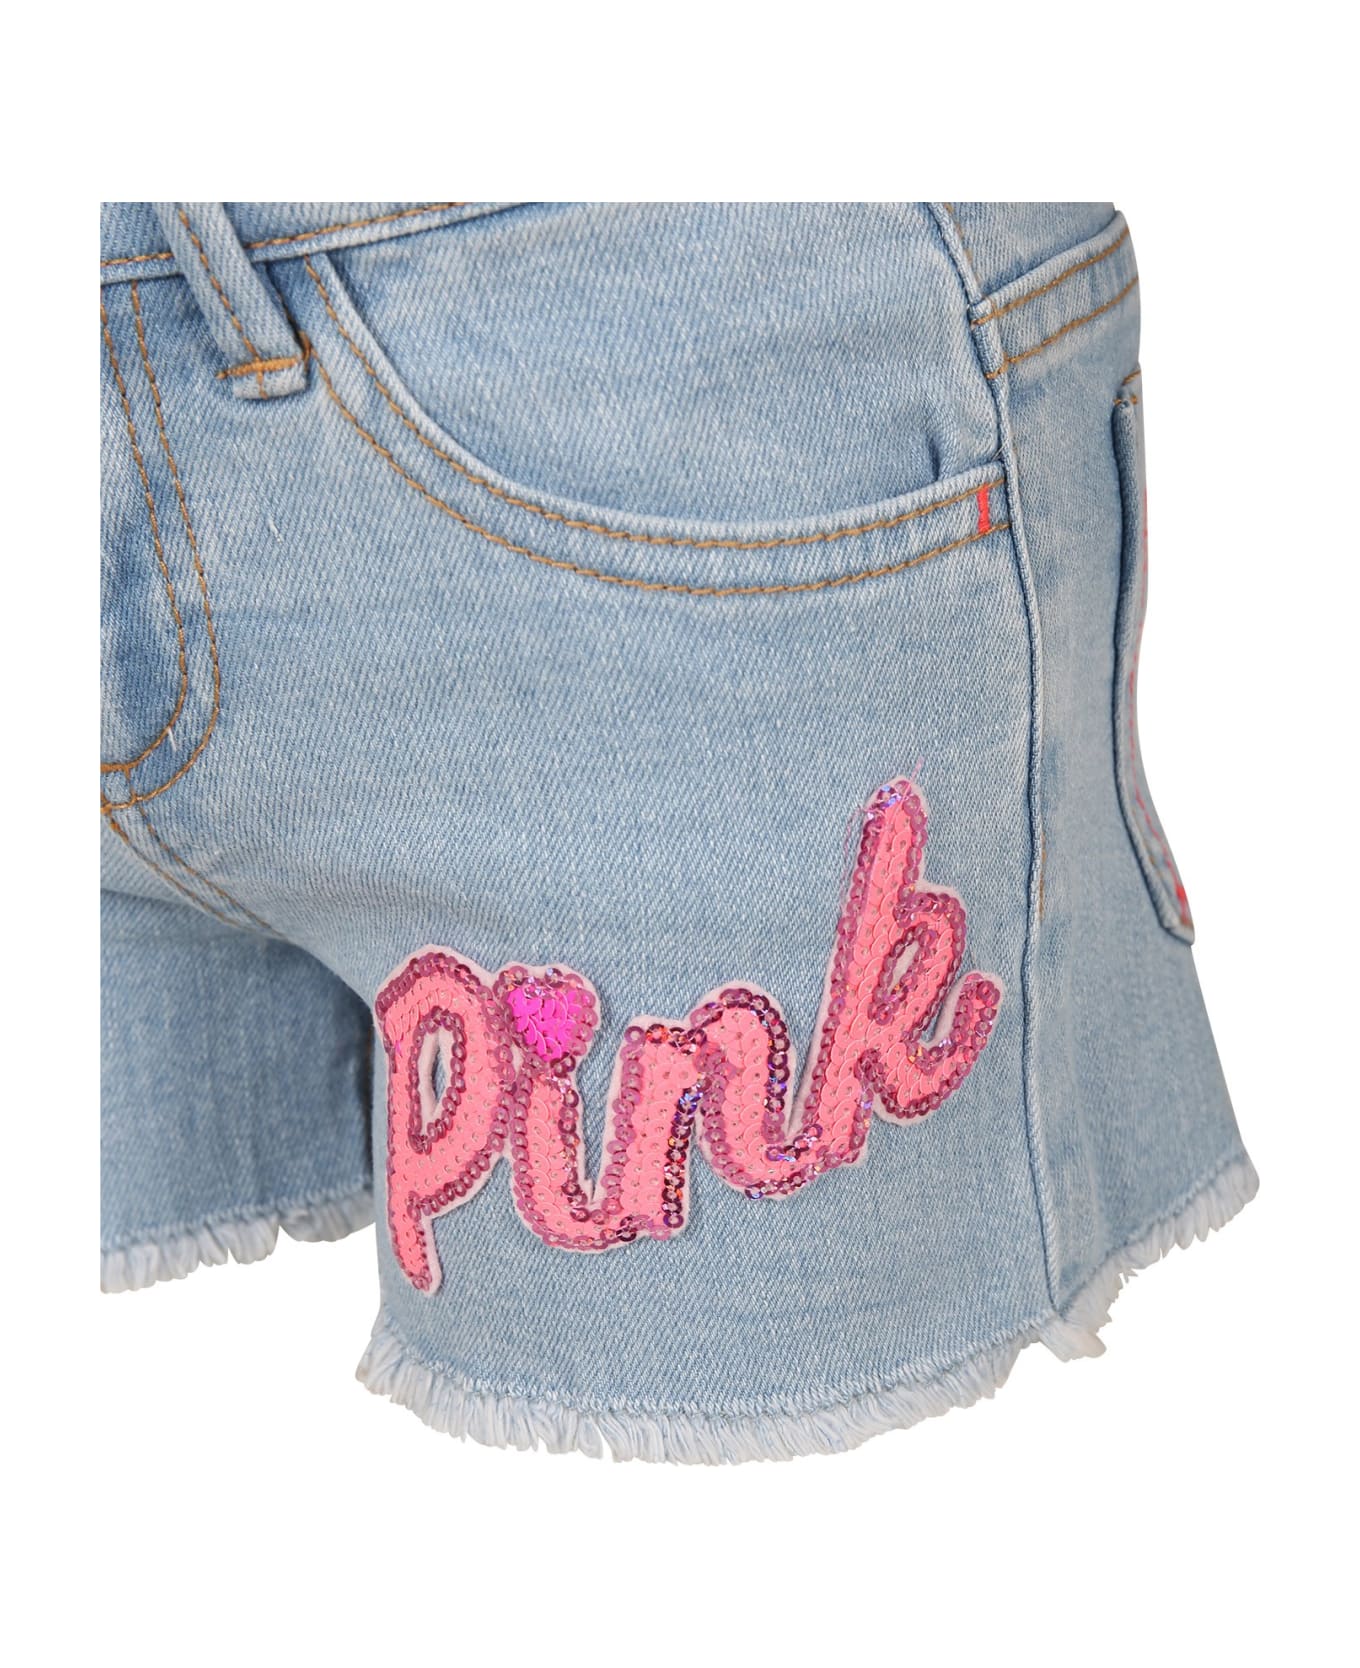 Billieblush Denim Shorts For Girl With Sequin Patches - Denim